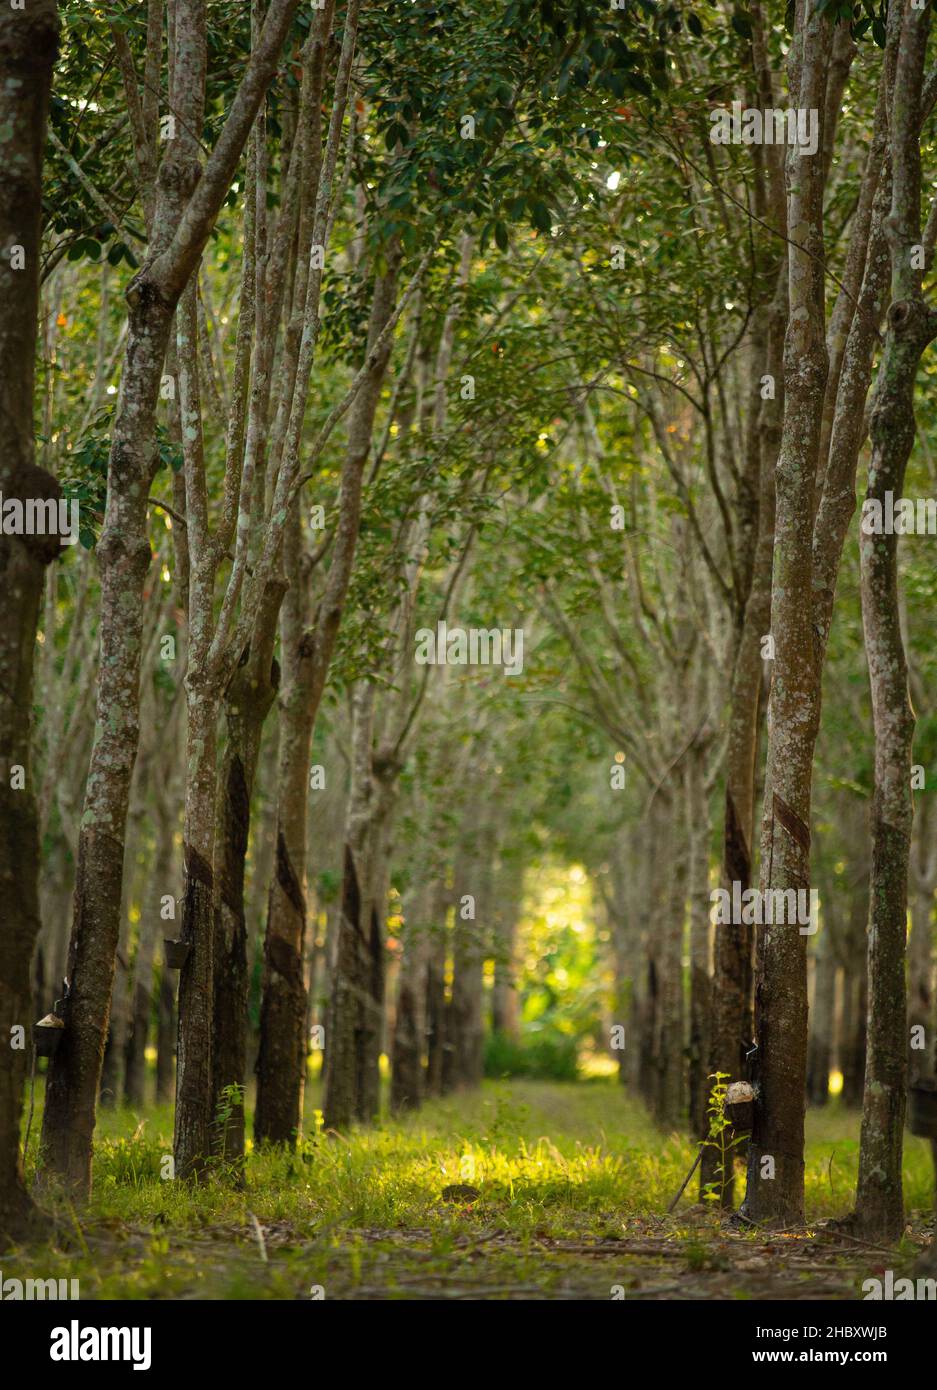 Tunnel view rubber trees (Hevea Brasiliensis). Rubber tapping Malaysia. Stock Photo